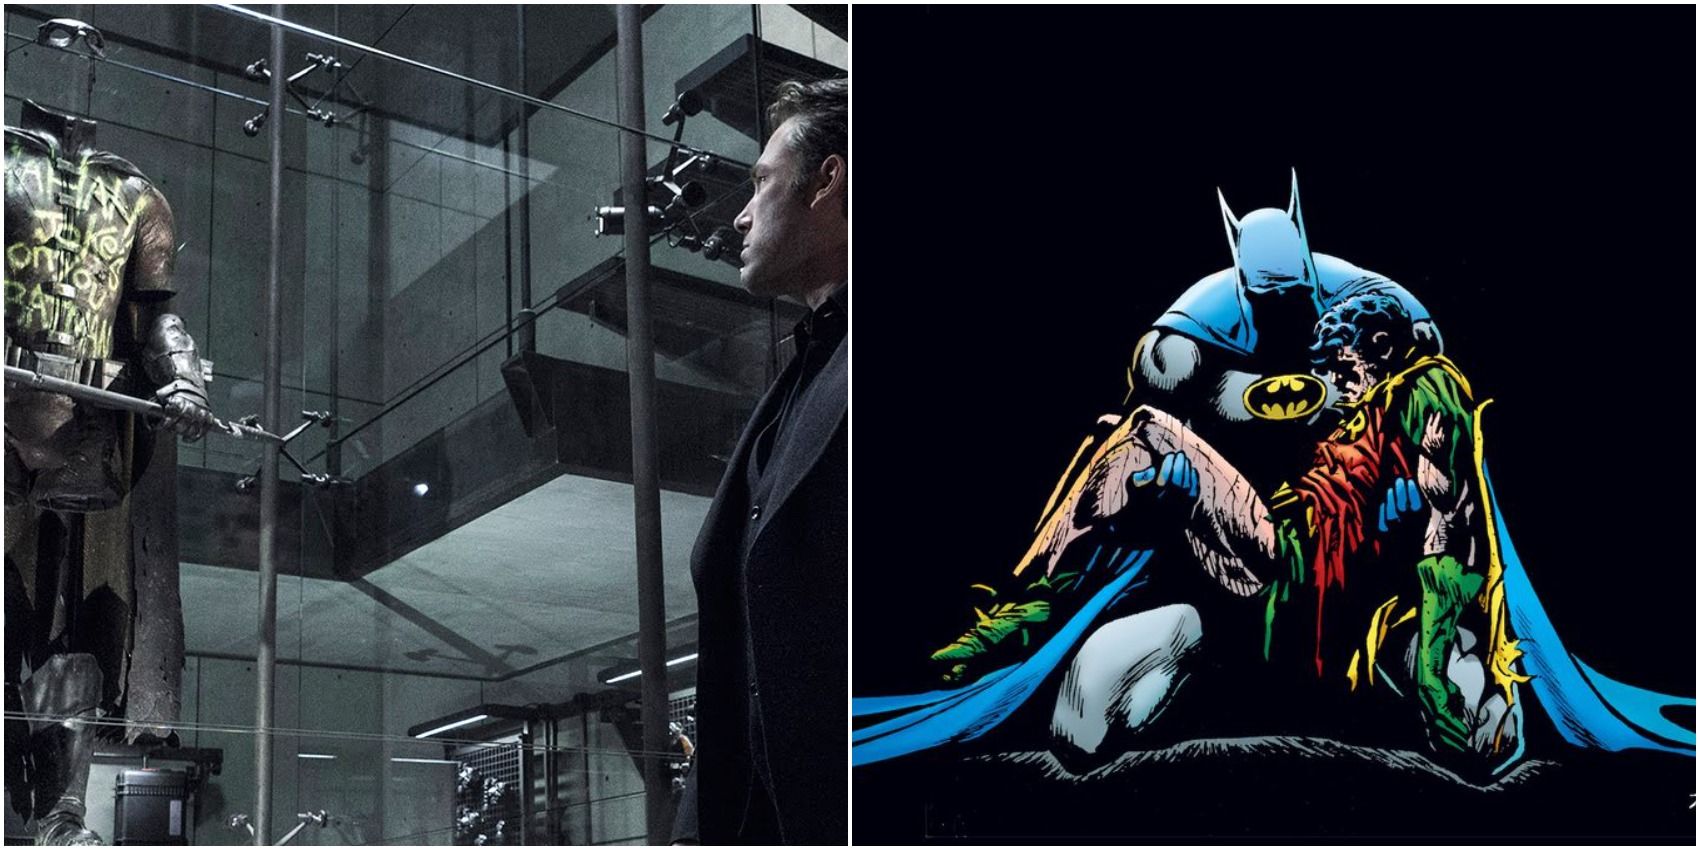 Batman looking at the late-Robin's suit in Batman v Superman and the acclaimed A Death in the Family comics